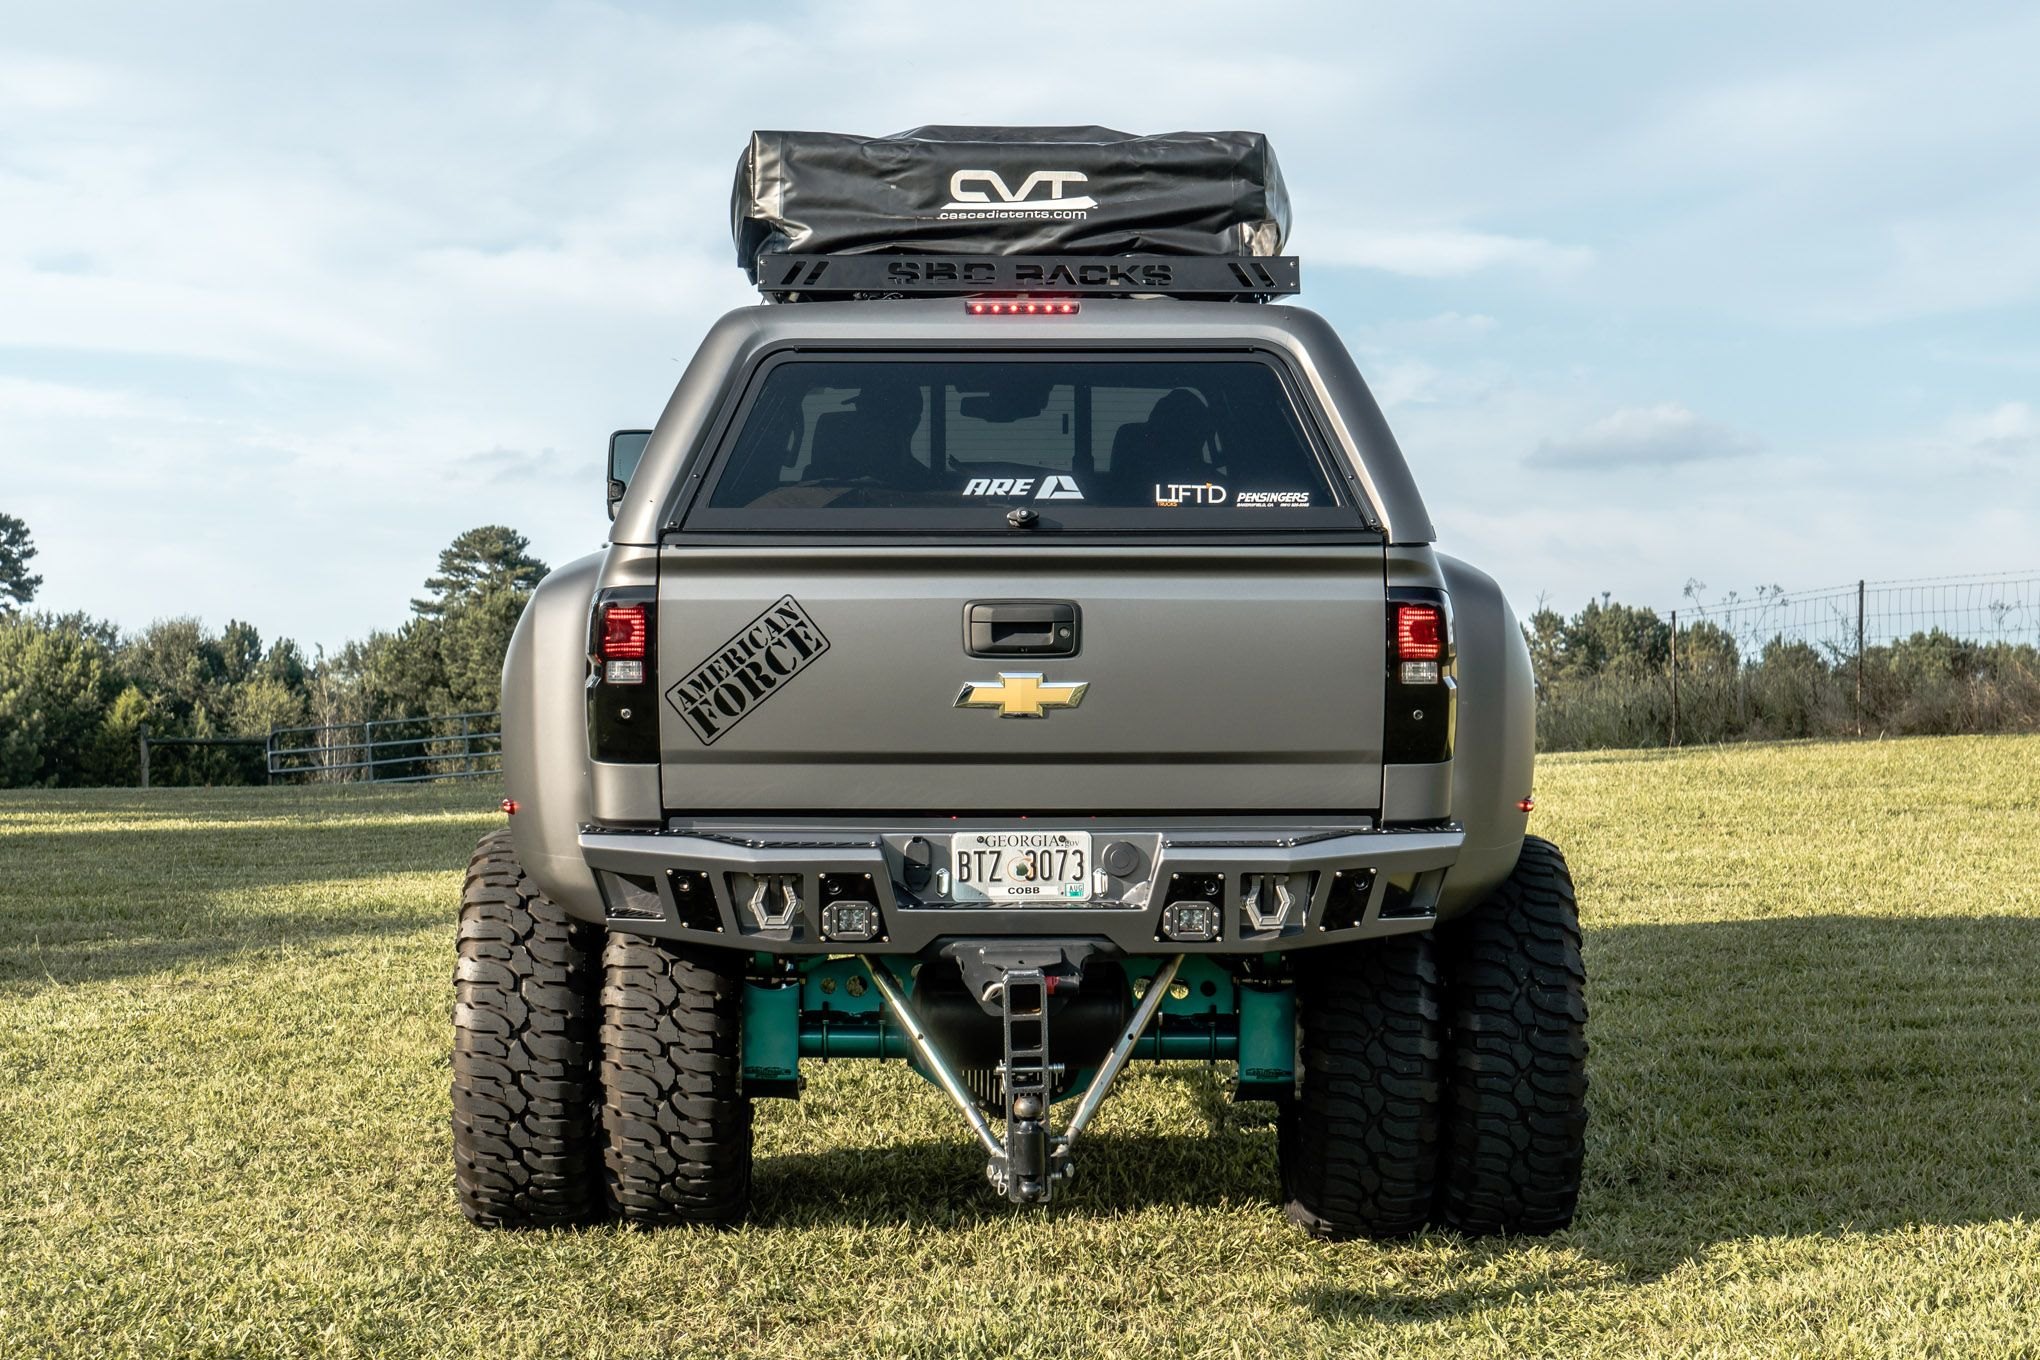 lamtac explore inside the dinosaur chevrolet off road with the giant s power of more than horsepower 650976cb7dd90 Explore Insιde The "dinosaur" CҺevroleT Off Road With The Giant's Power Of More Than 759 Horsepower